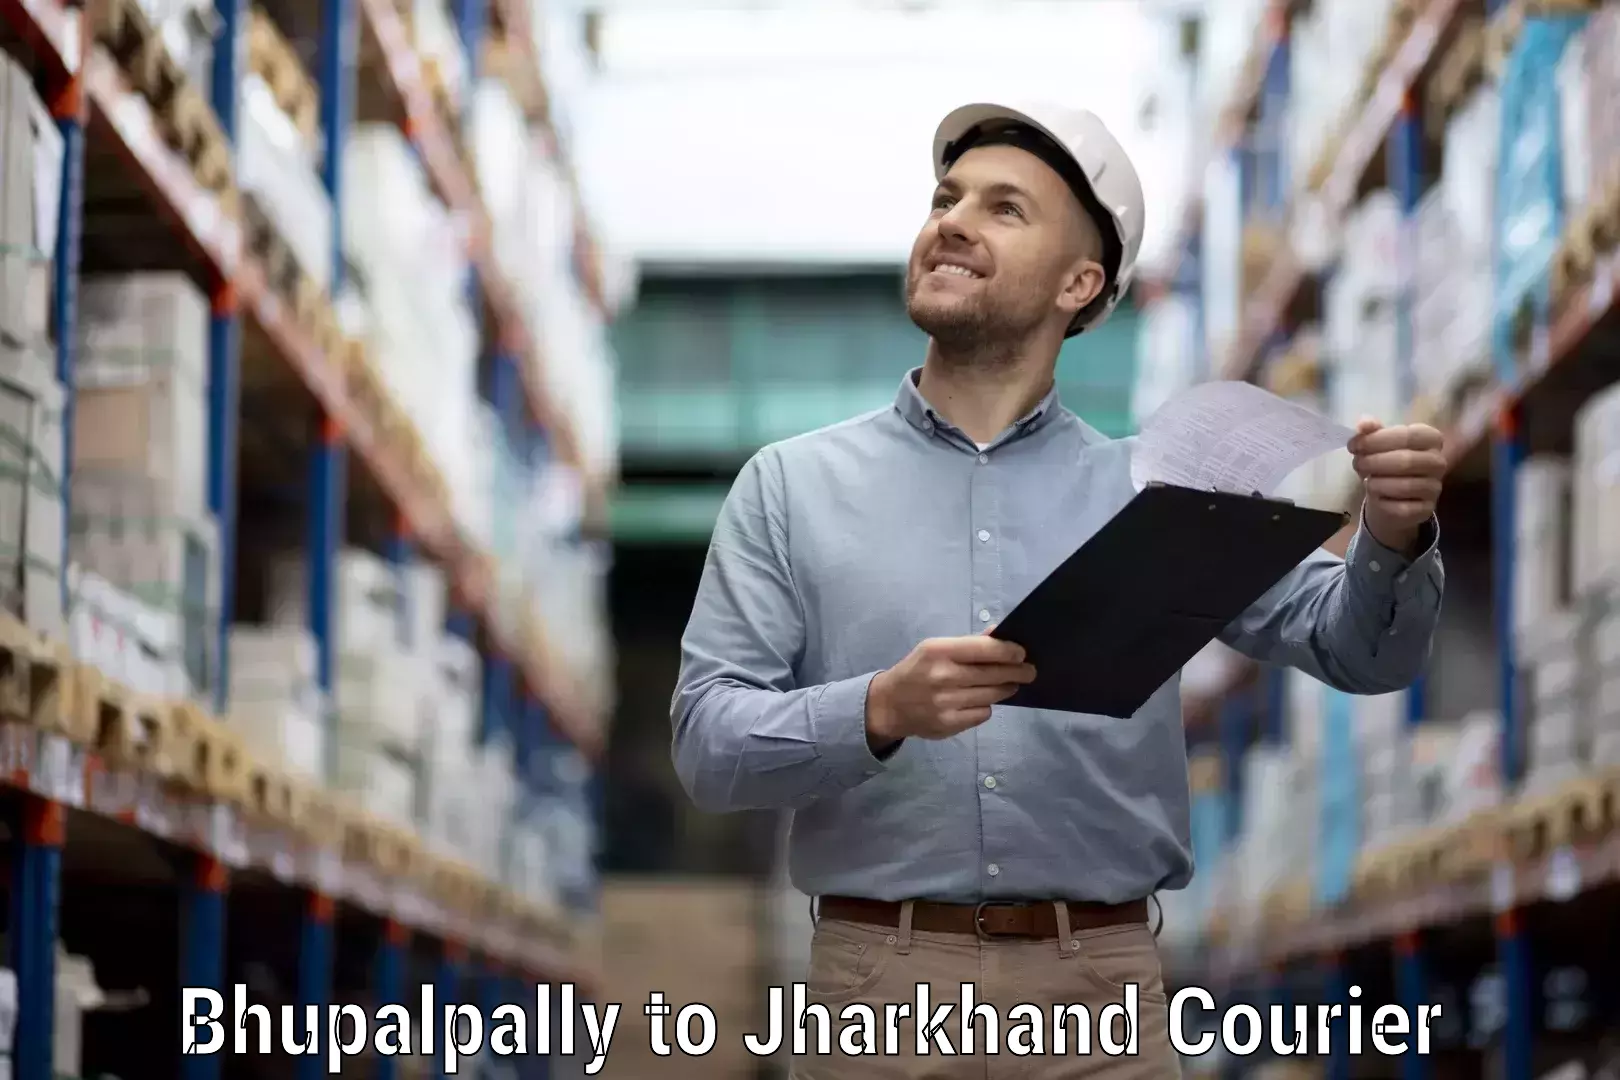 High-priority parcel service Bhupalpally to Jharkhand